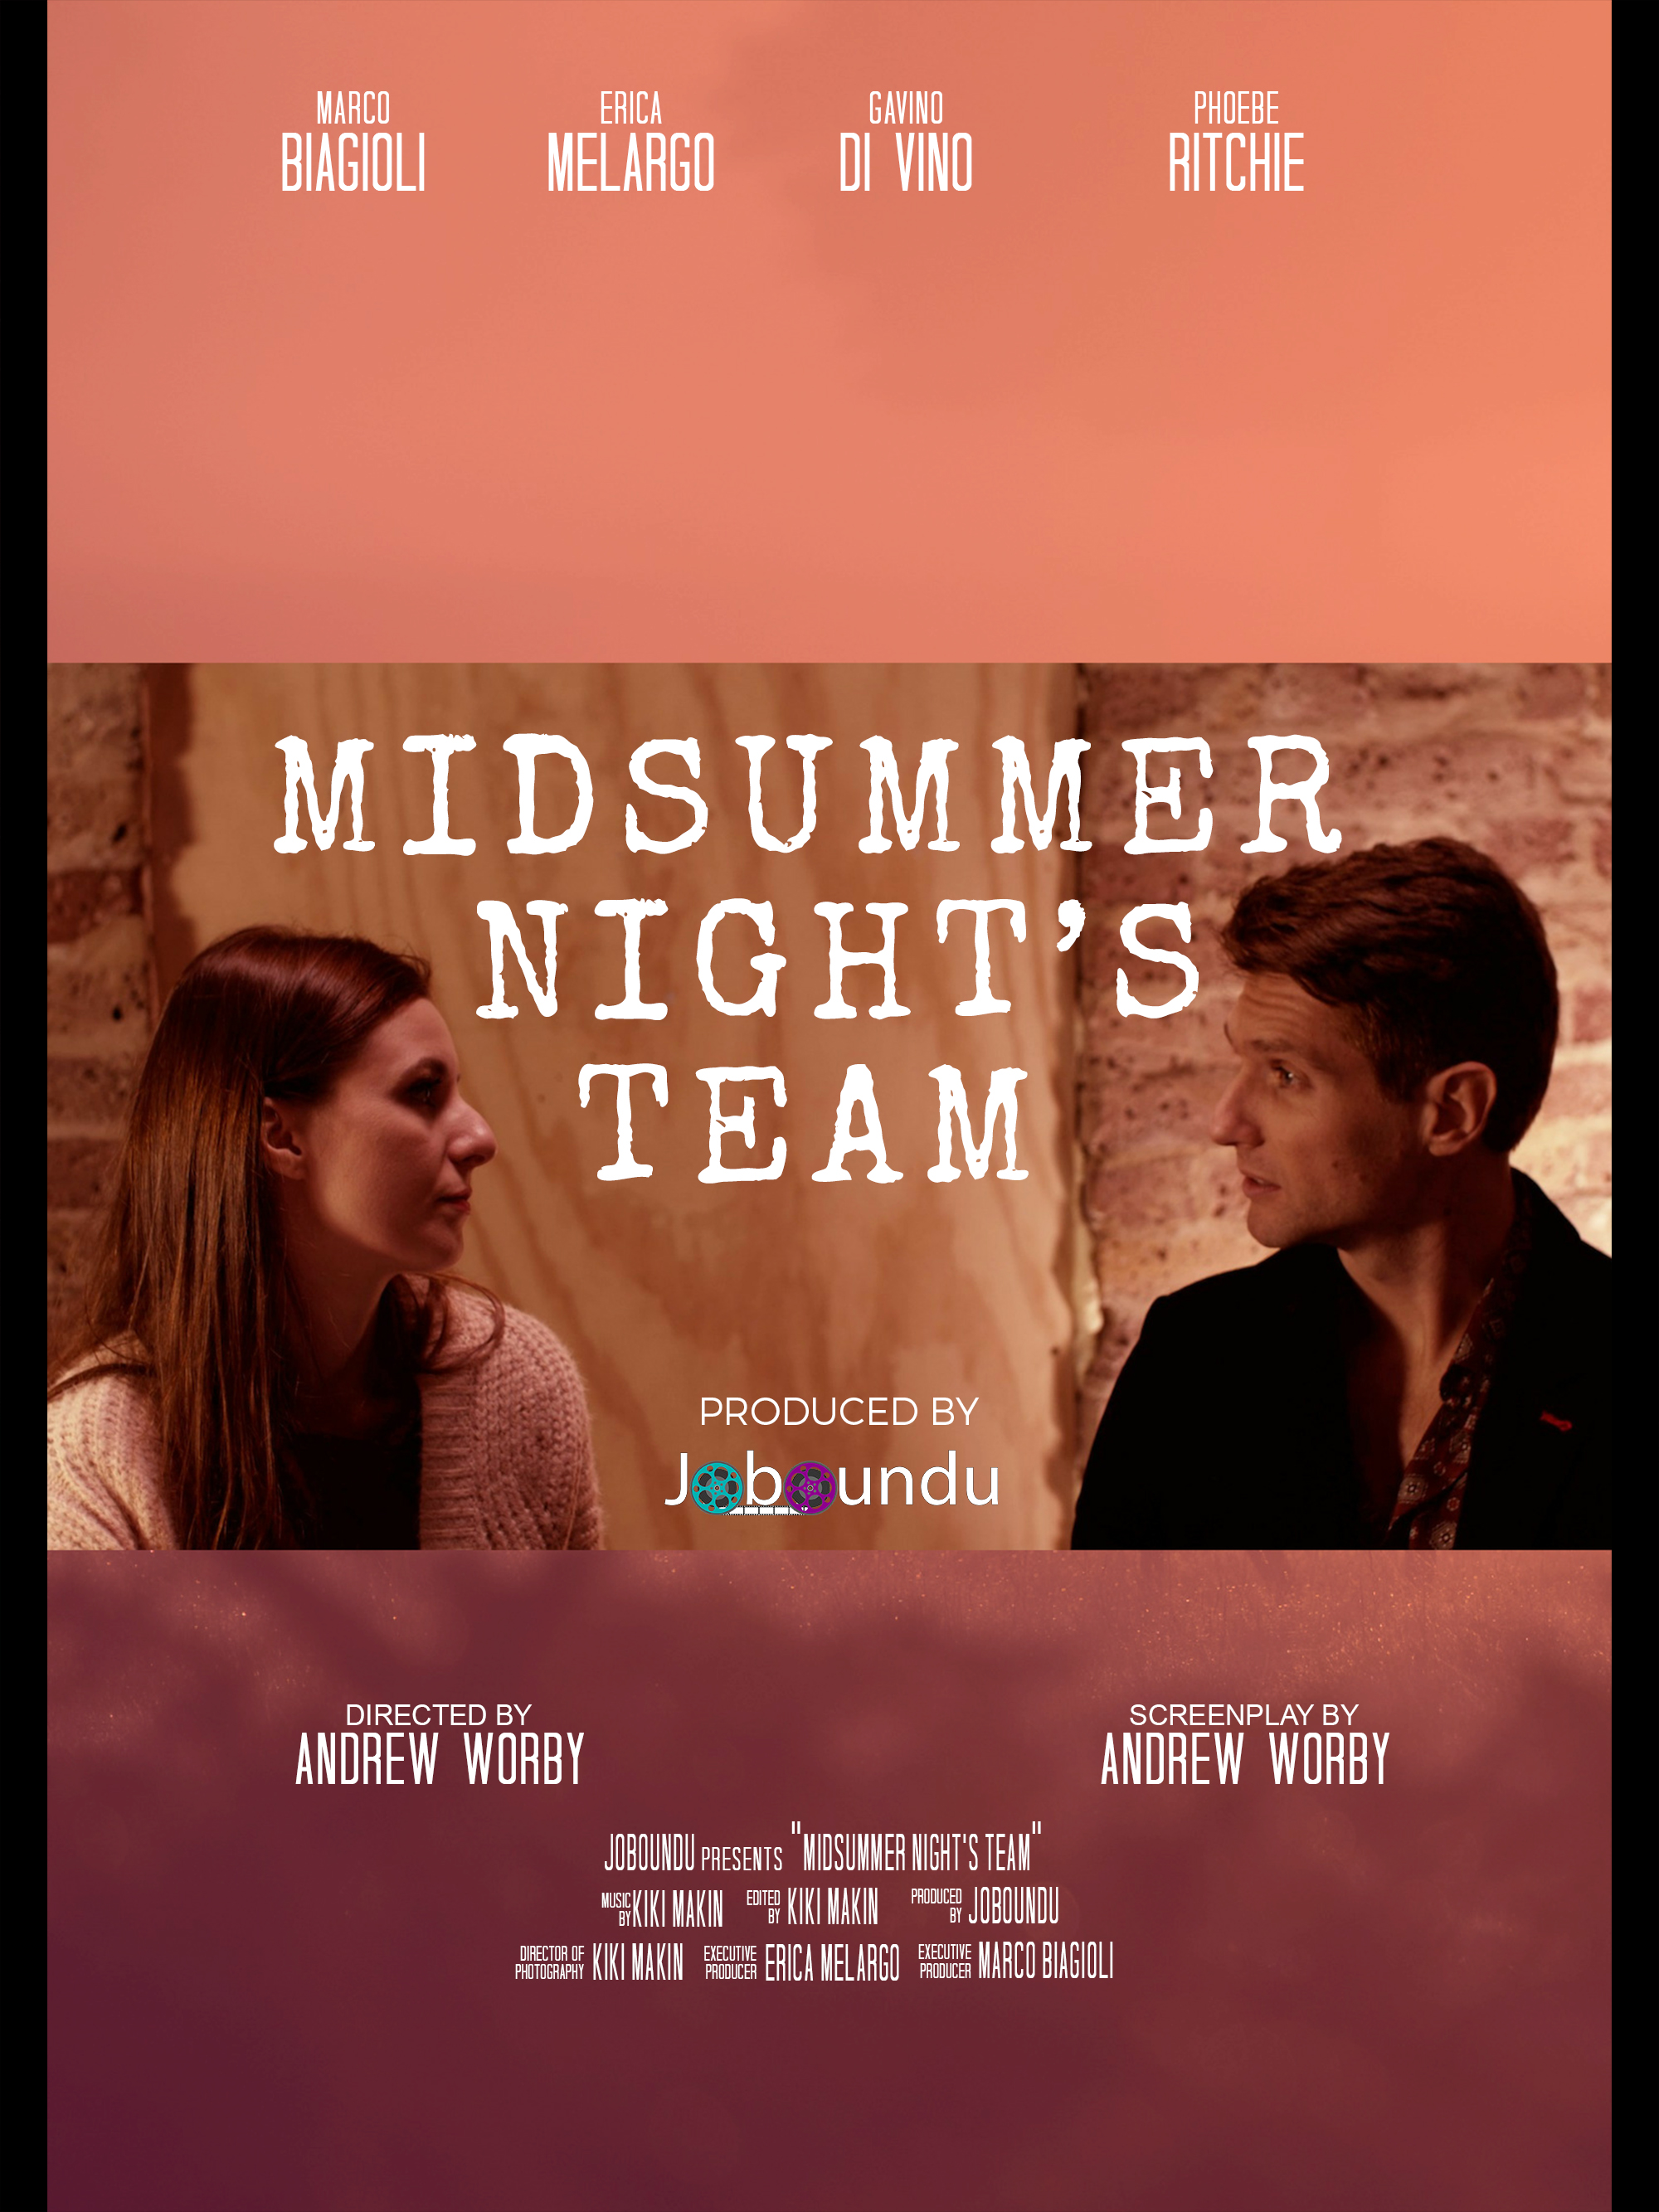 You are currently viewing MIDSUMMER NIGHT’S TEAM | Joboundu Short Comedy Film